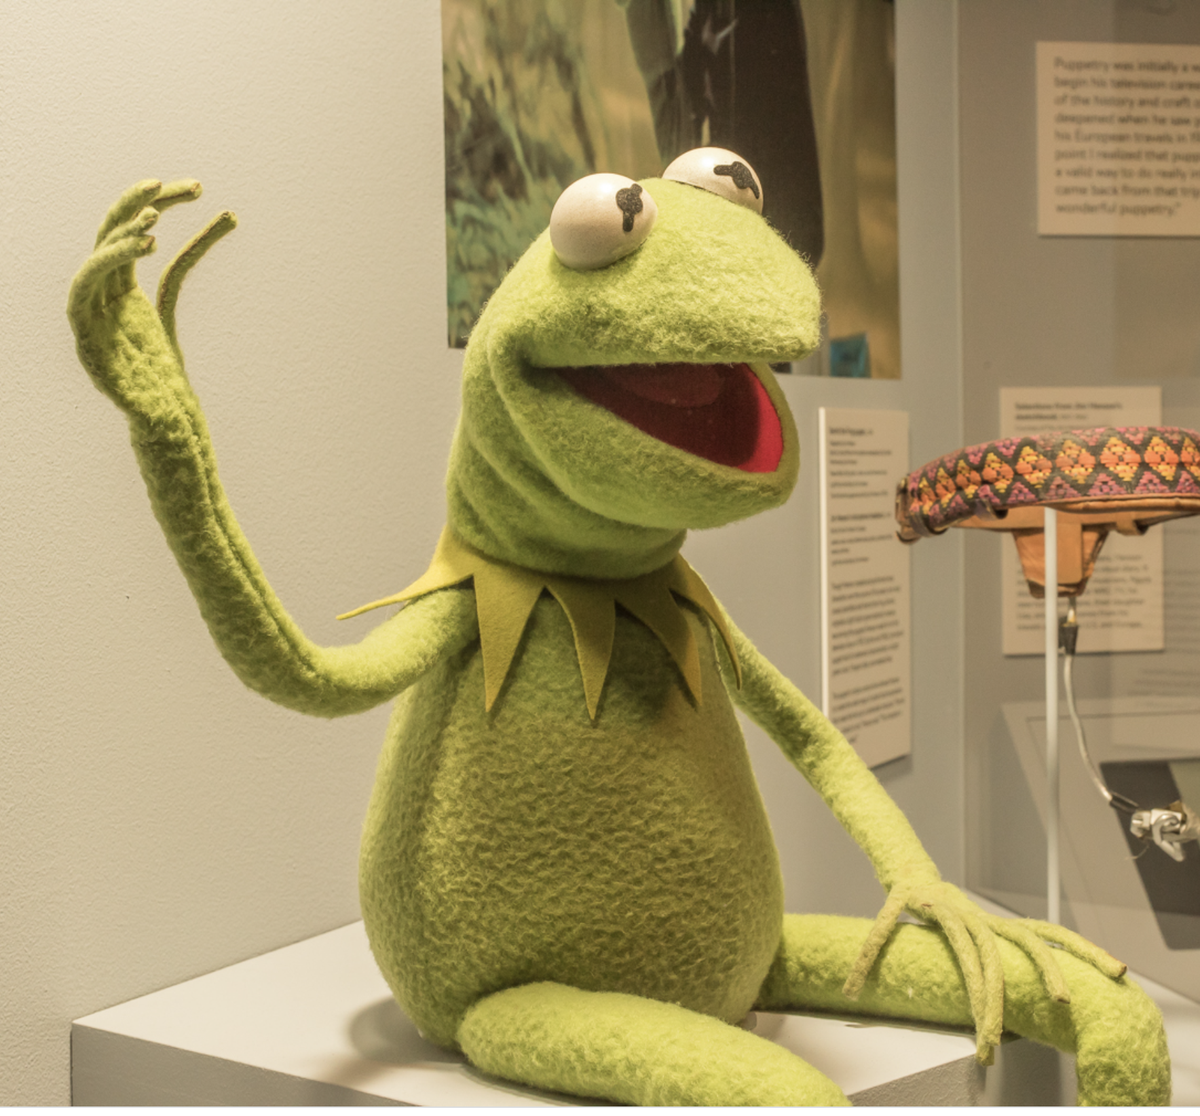 <p><strong>Location: </strong>Astoria, Queens </p><p>Another staff favorite, the Jim Henson exhibit at the <a href="https://go.redirectingat.com?id=74968X1553576&url=https%3A%2F%2Fwww.tripadvisor.com%2FAttraction_Review-g29837-d136165-Reviews-Museum_of_the_Moving_Image-Astoria_Queens_New_York.html&sref=https%3A%2F%2Fwww.goodhousekeeping.com%2Flife%2Ftravel%2Fg44504955%2Fthings-to-do-in-nyc%2F">Museum of the Moving Image</a> appeals to kids of all ages. "Younger kids can decorate a Muppet body with eyes and hair," says a Good Housekeeping editor. Meanwhile, older kids will enjoy the interactive stations where they can try their hand at ADR, foley effects, music cues or stop-motion animation. You might even luck out and go on a day when there's a kid-friendly screening. </p>